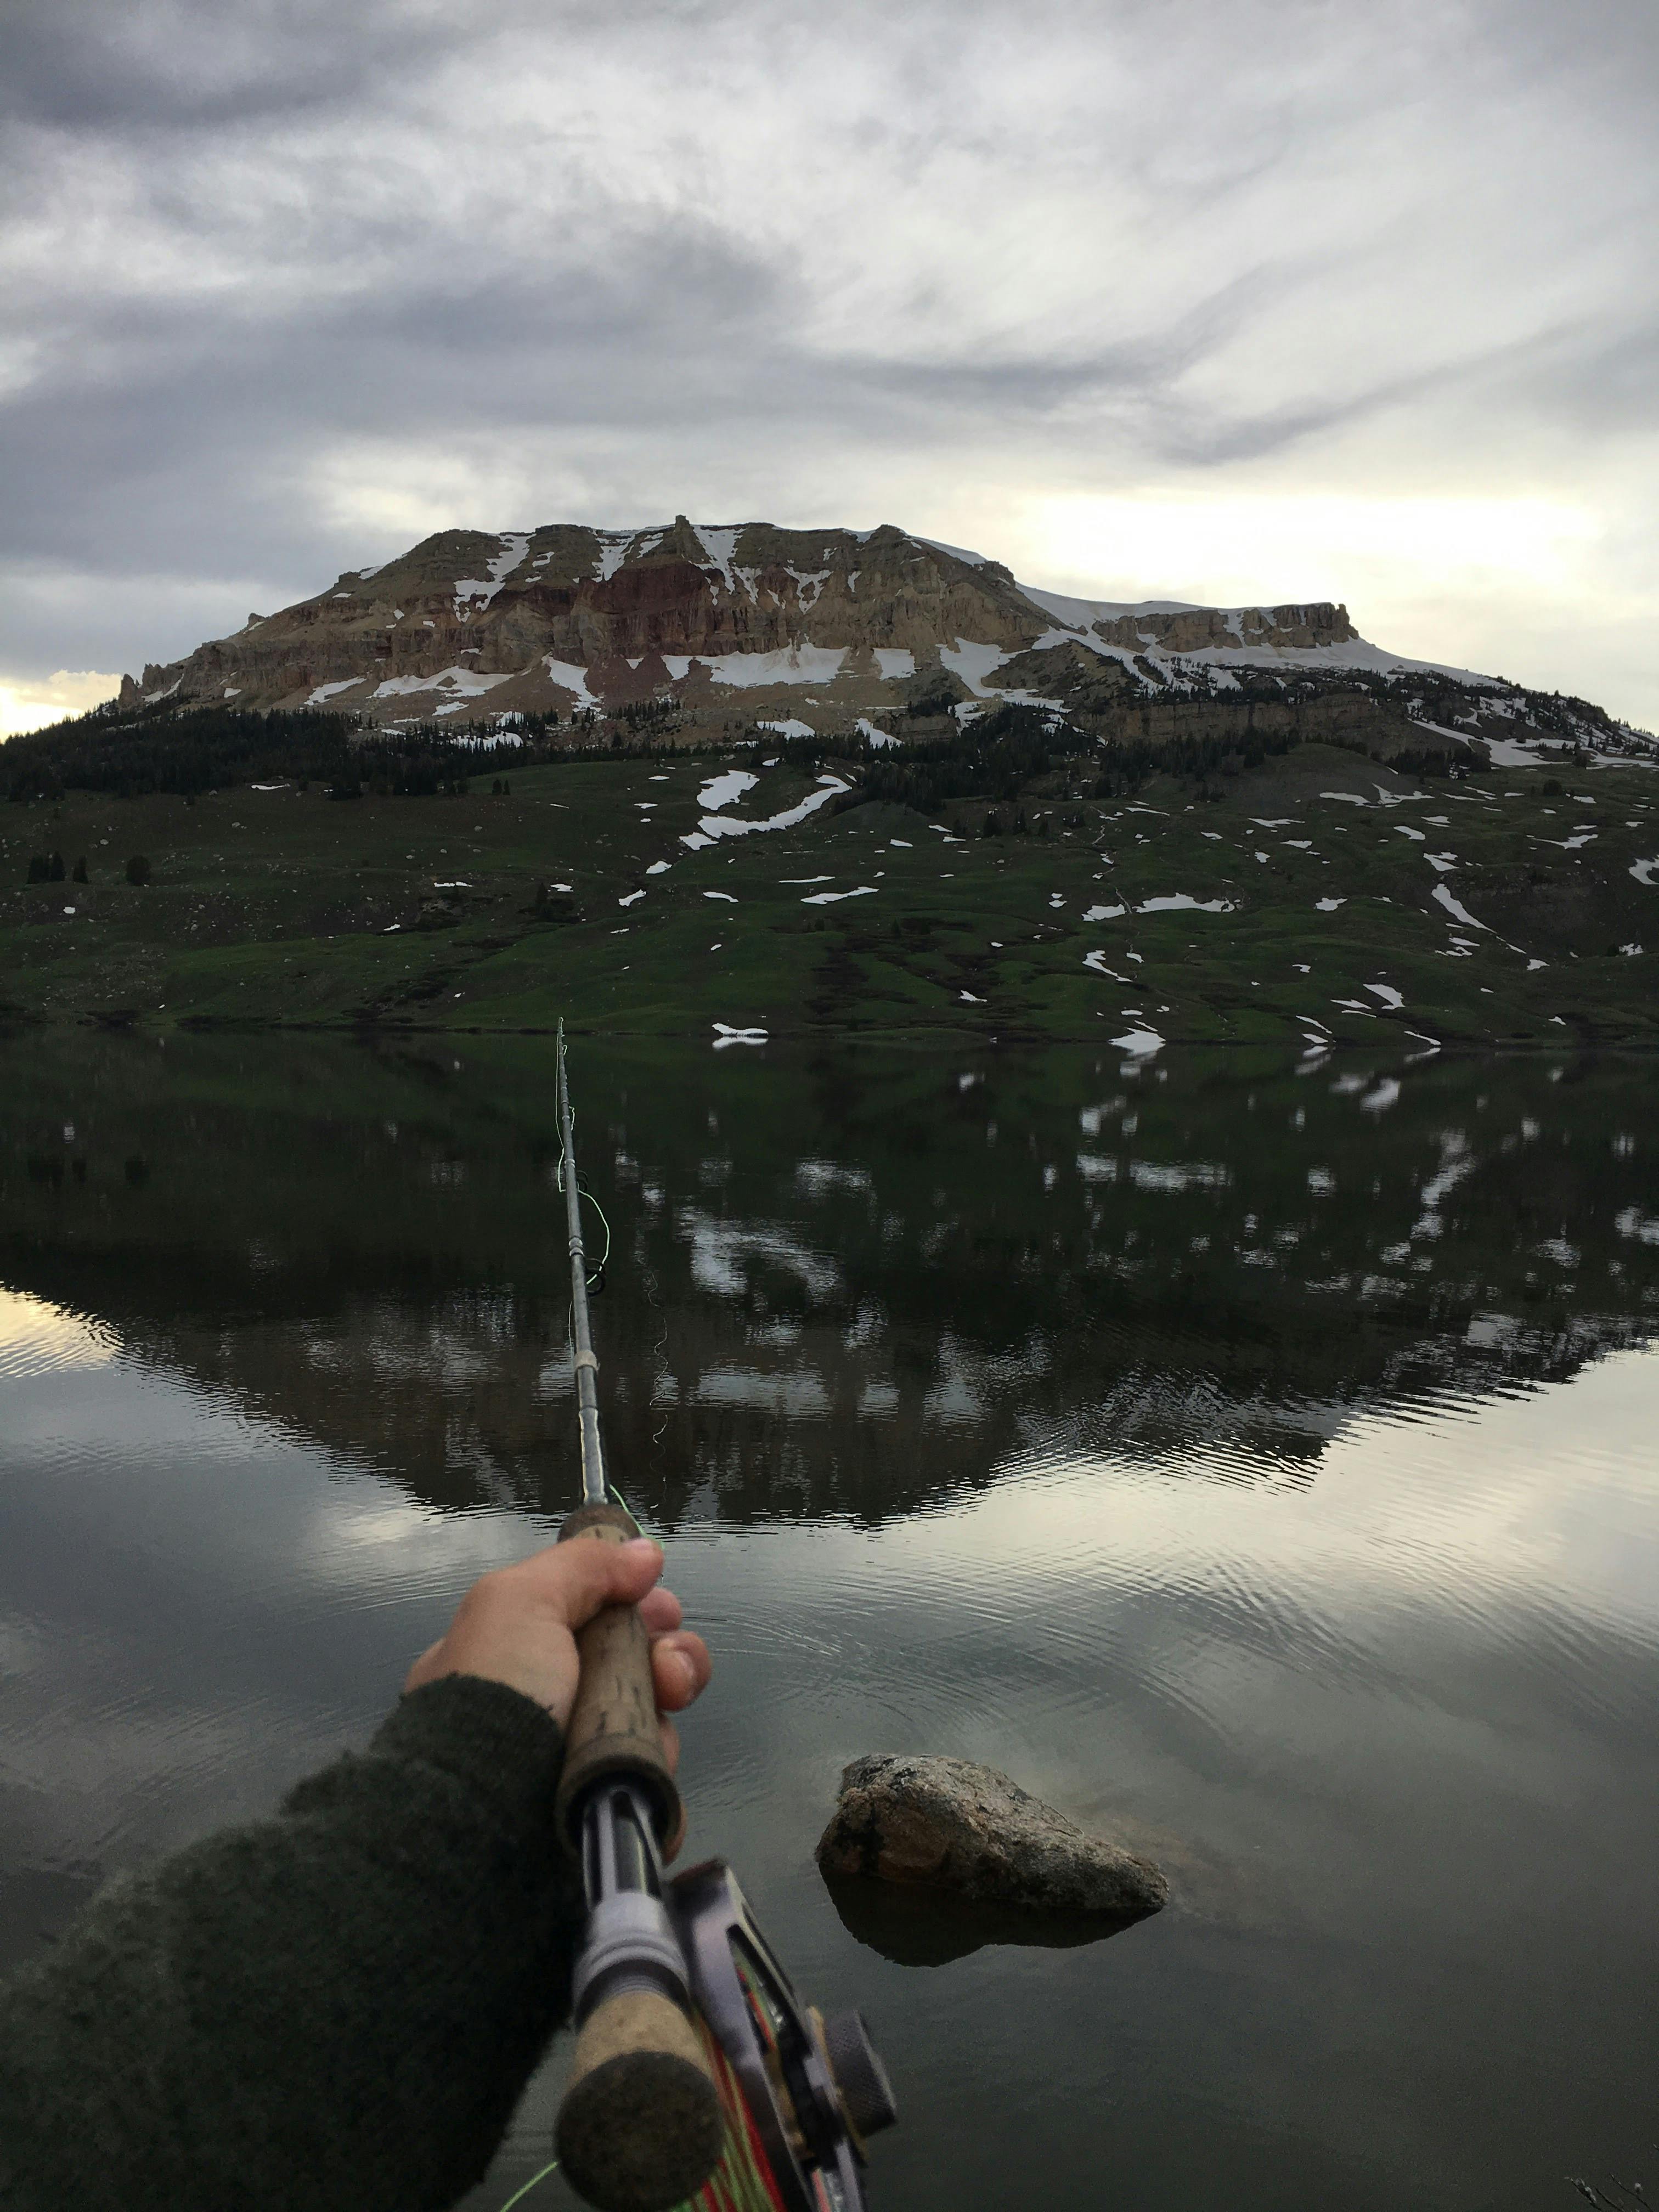 A person casts a fly rod out onto reflective water with a mountain across the way